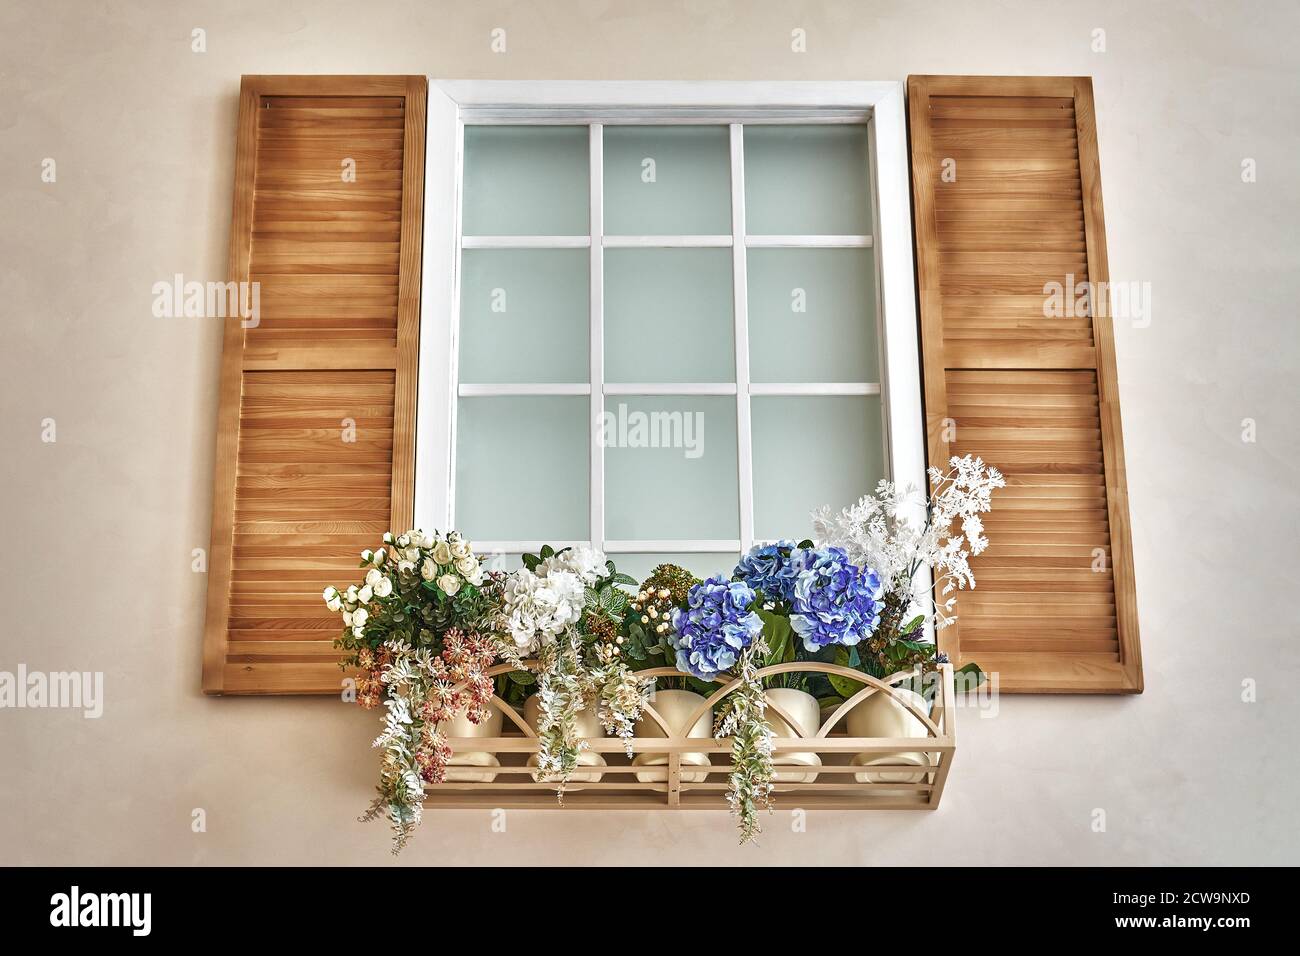 Faux interior window with wooden shutters and blooming flowers in ornamental flowerpot Stock Photo